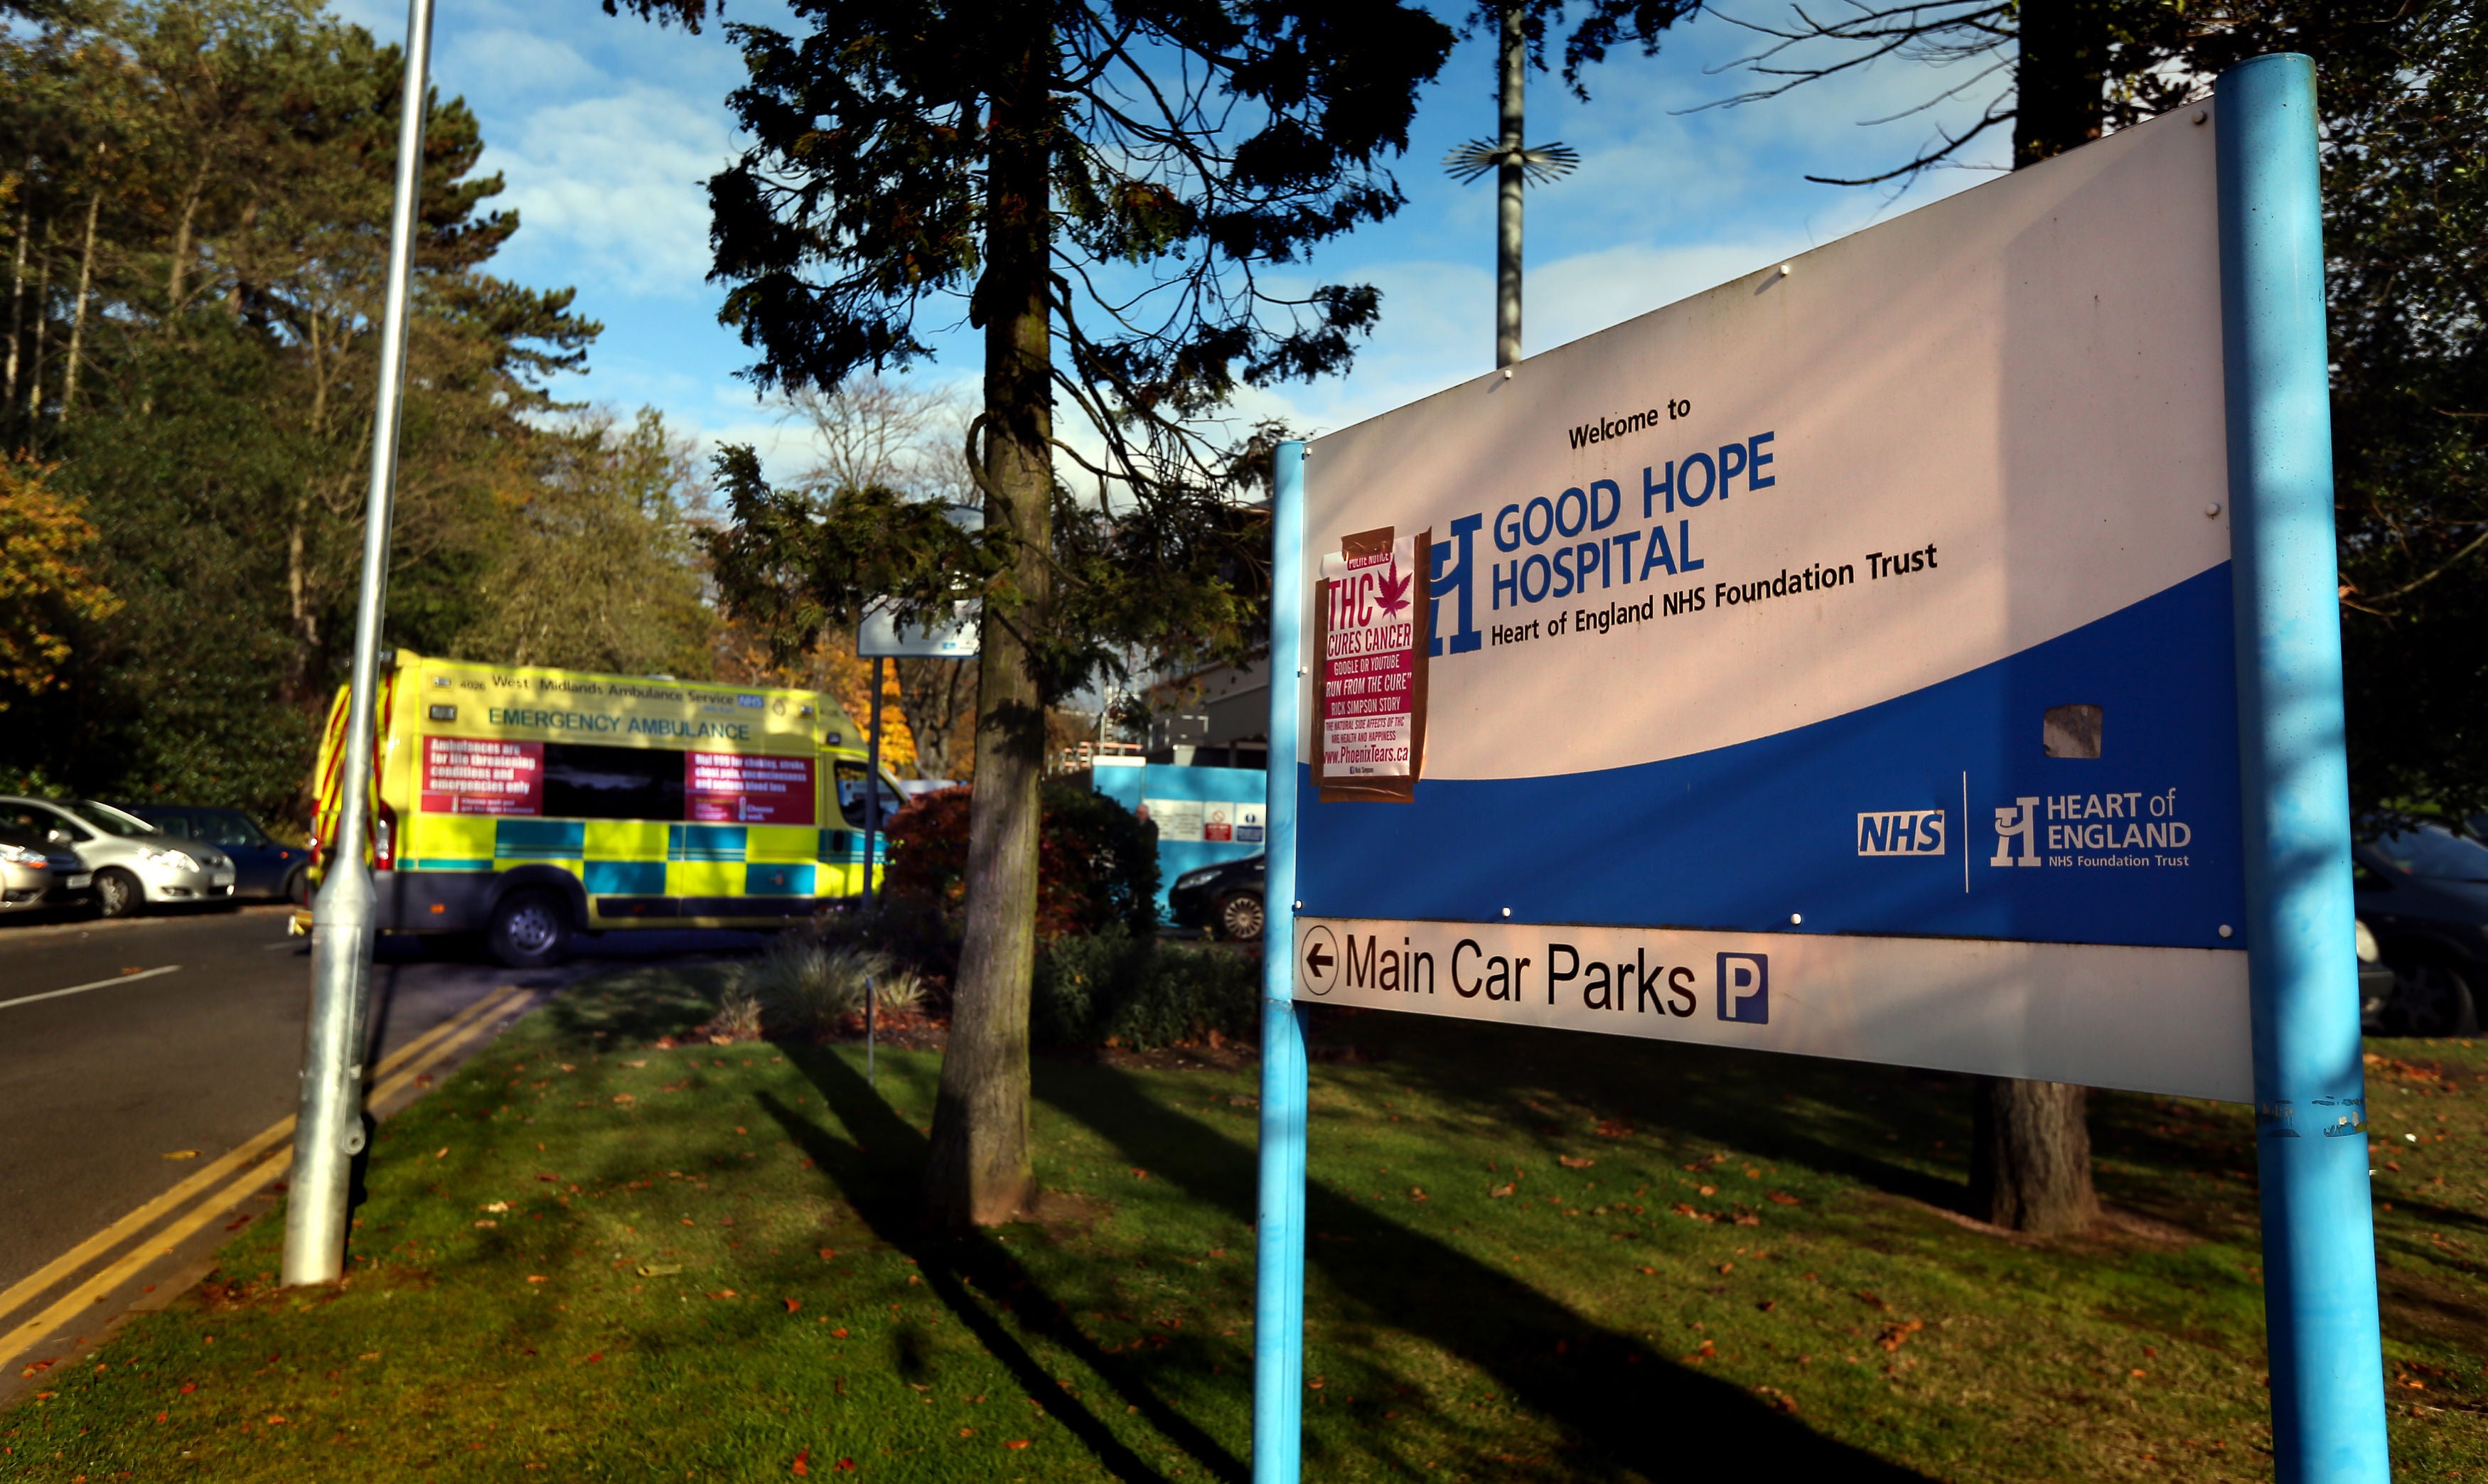 The body was found in a car in the hospital car park